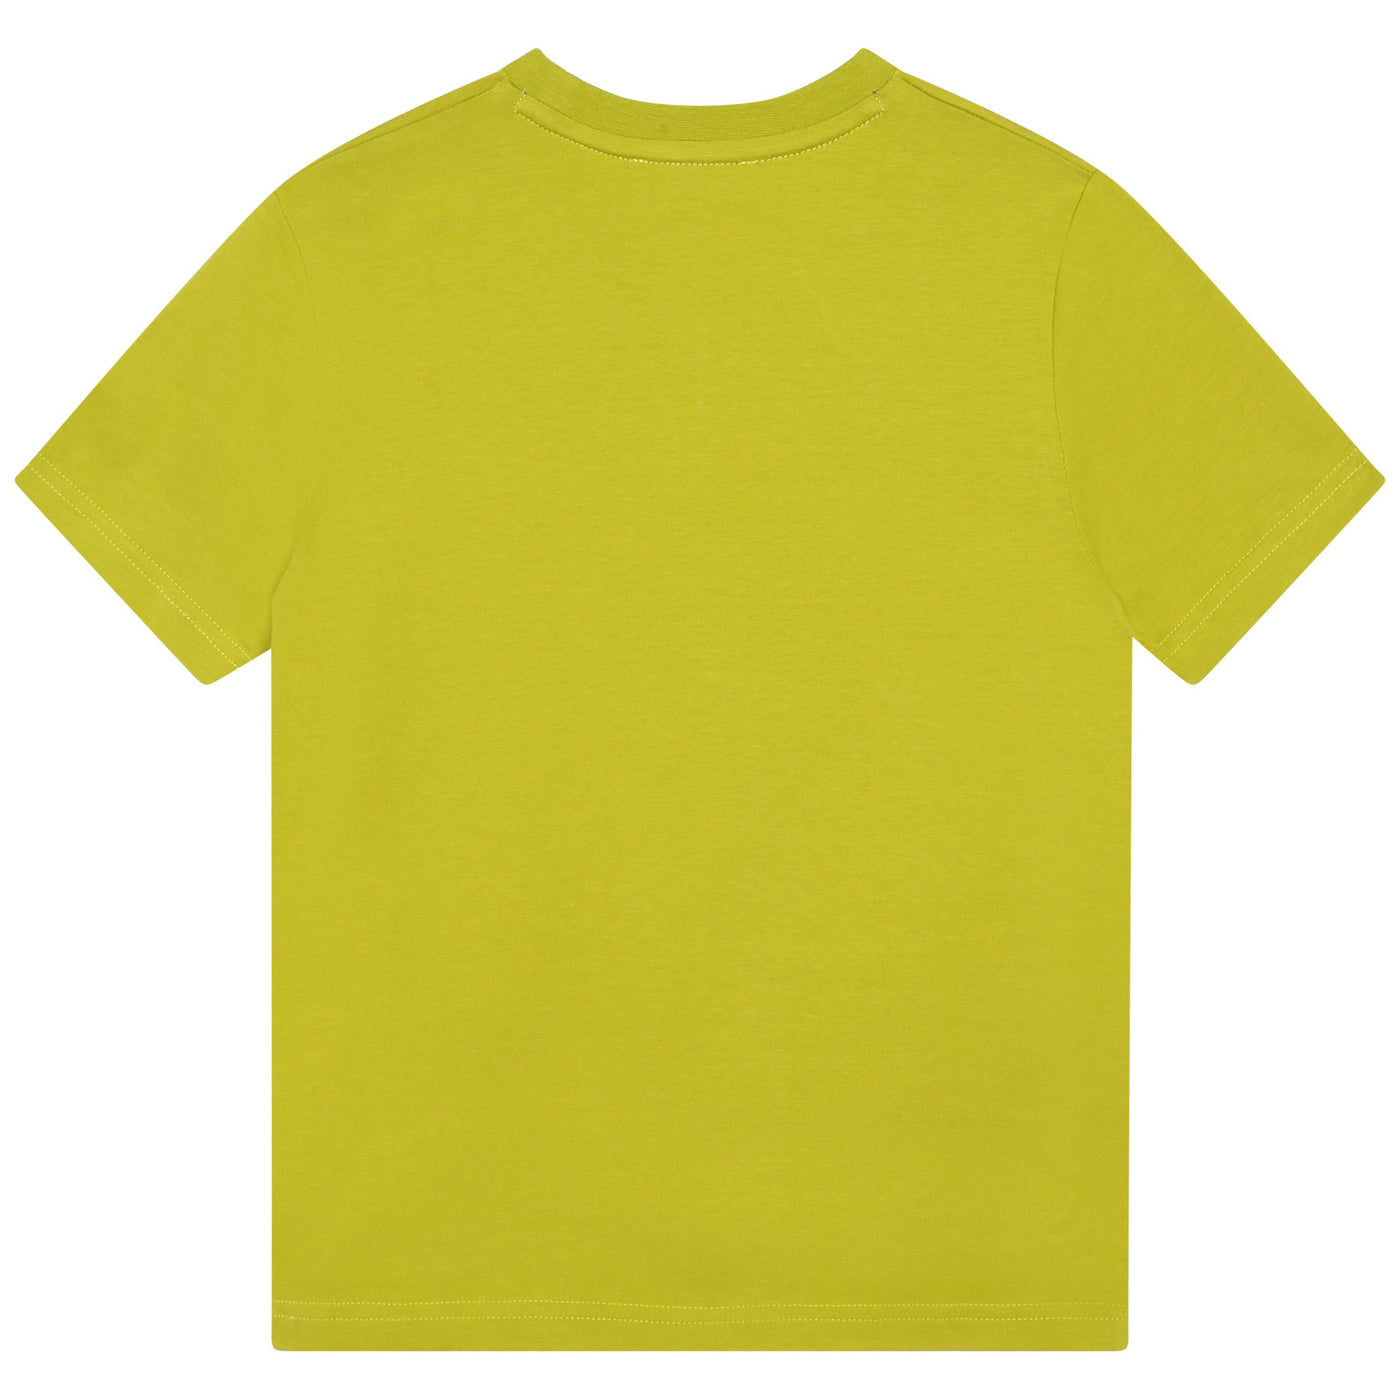 Lime Green Short Sleeve T-shirt By DKNY